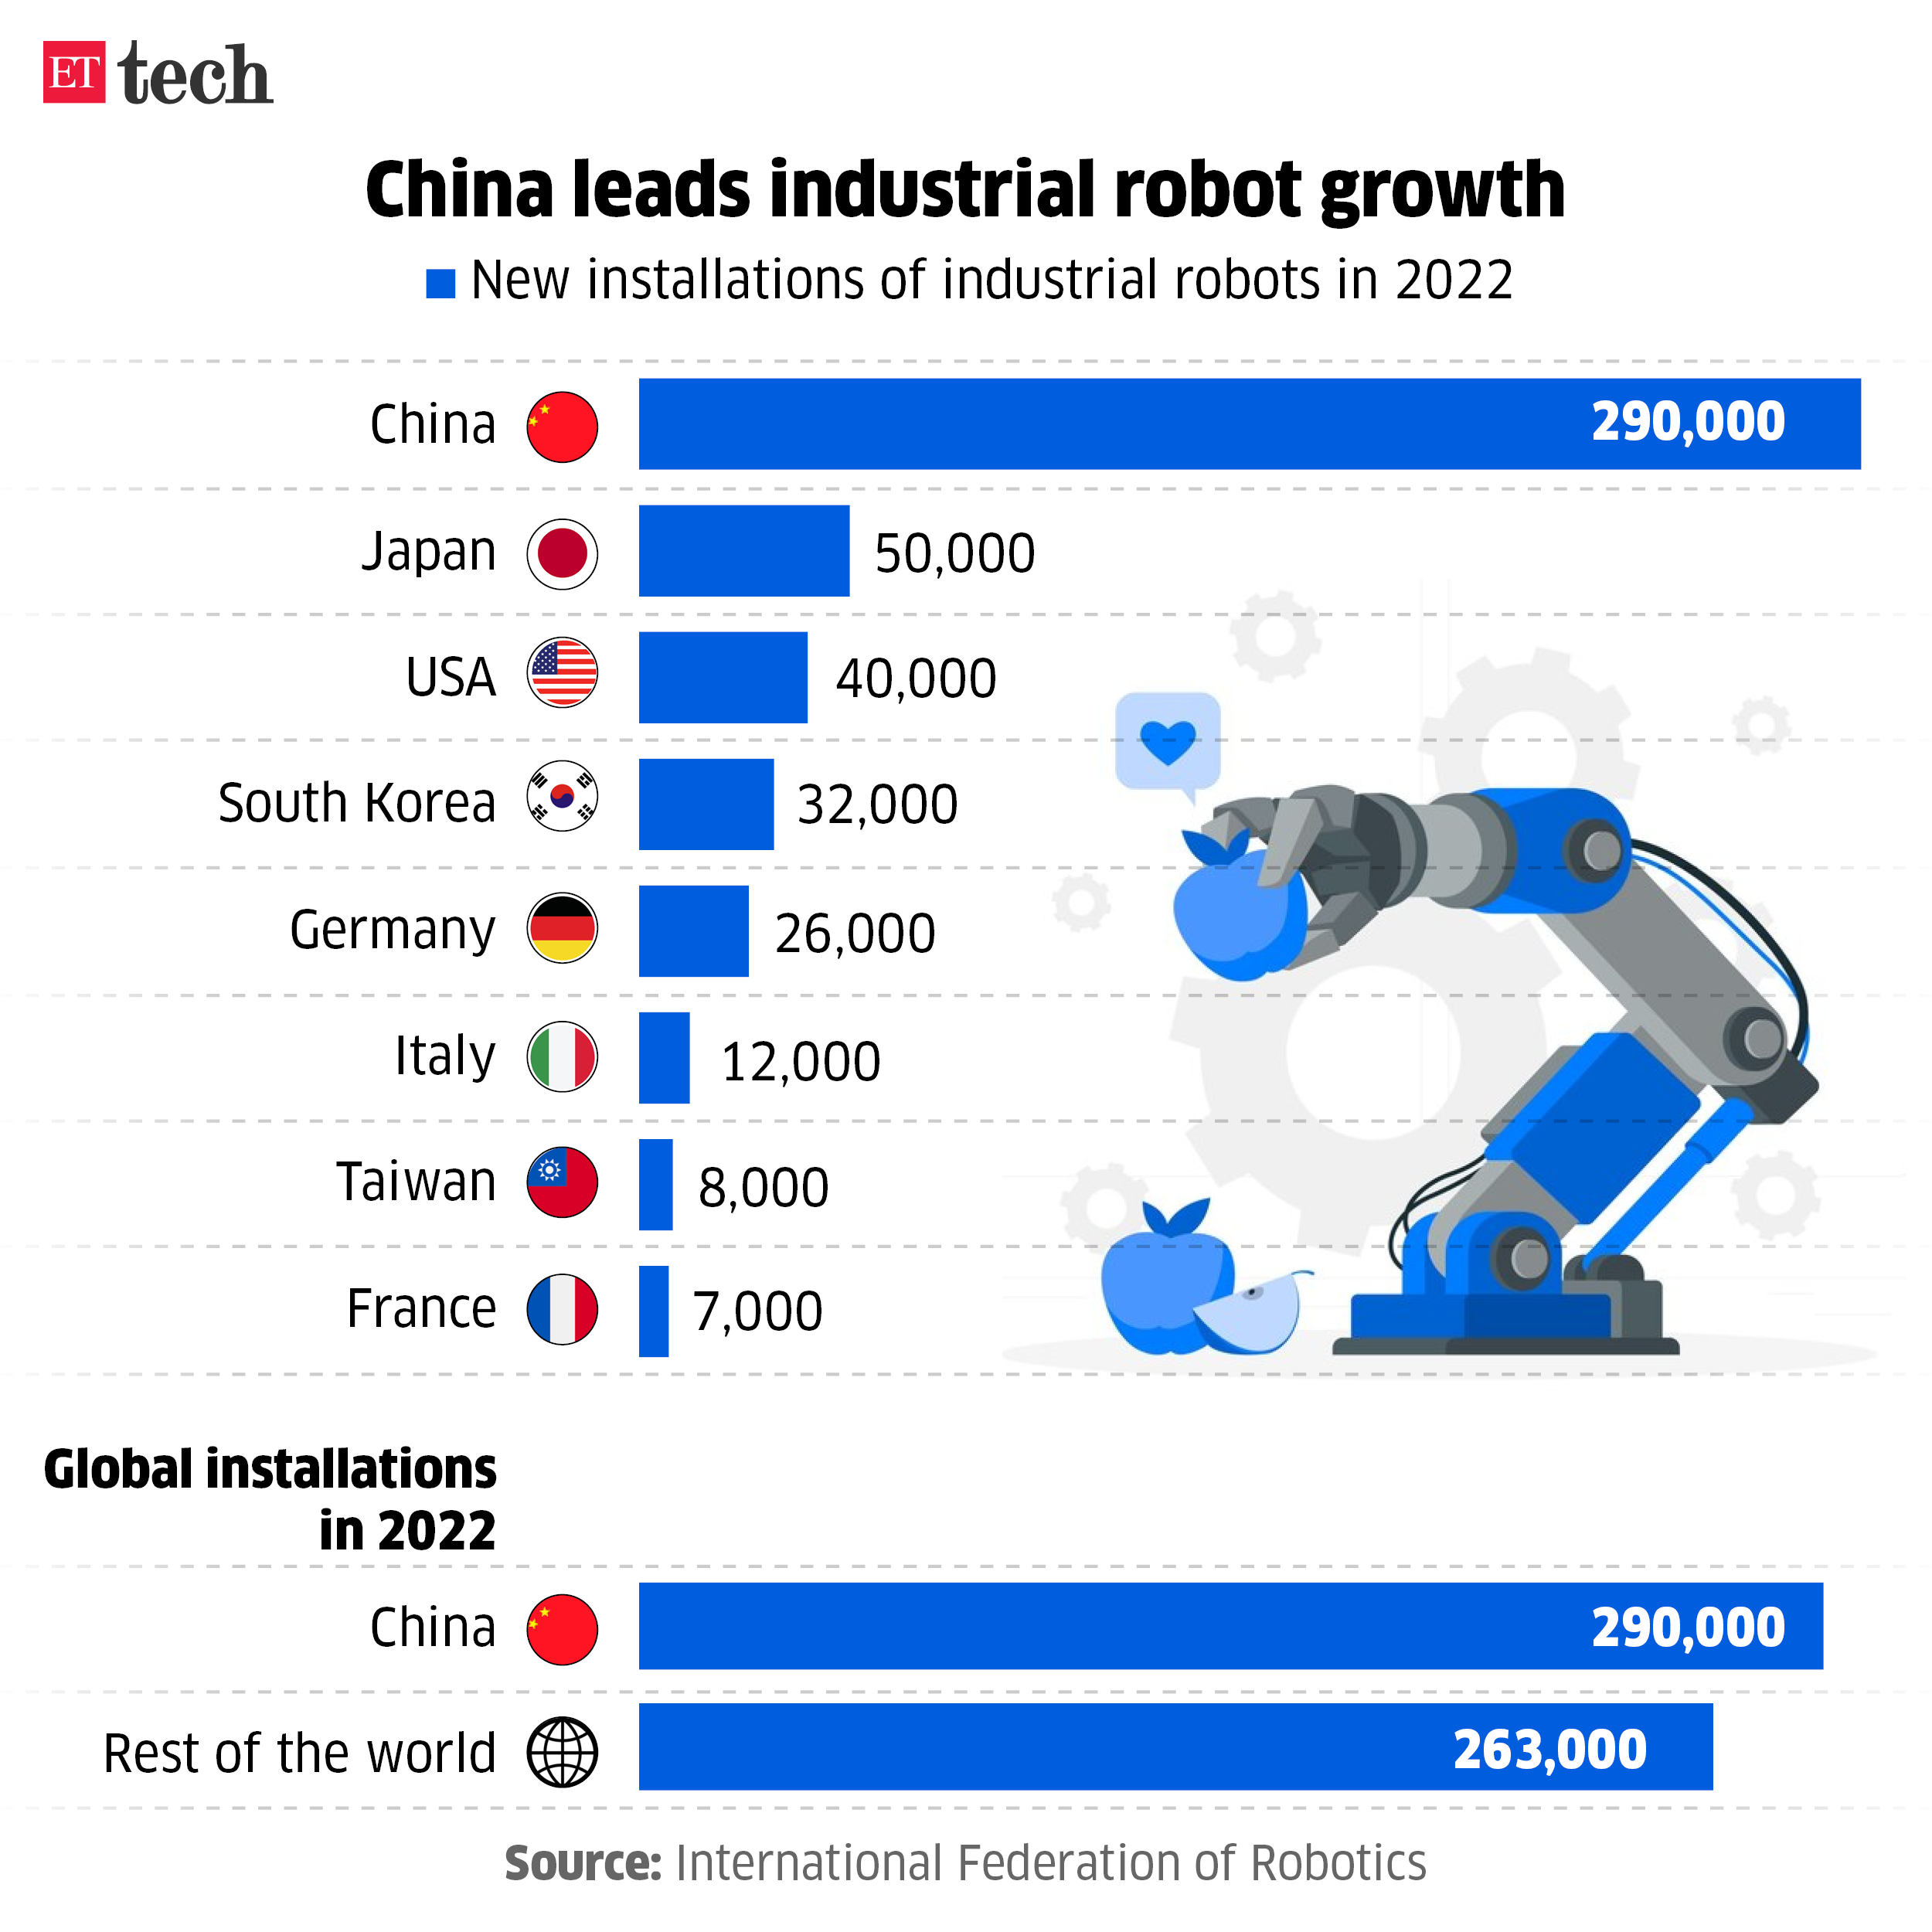 China leads industrial robot growth